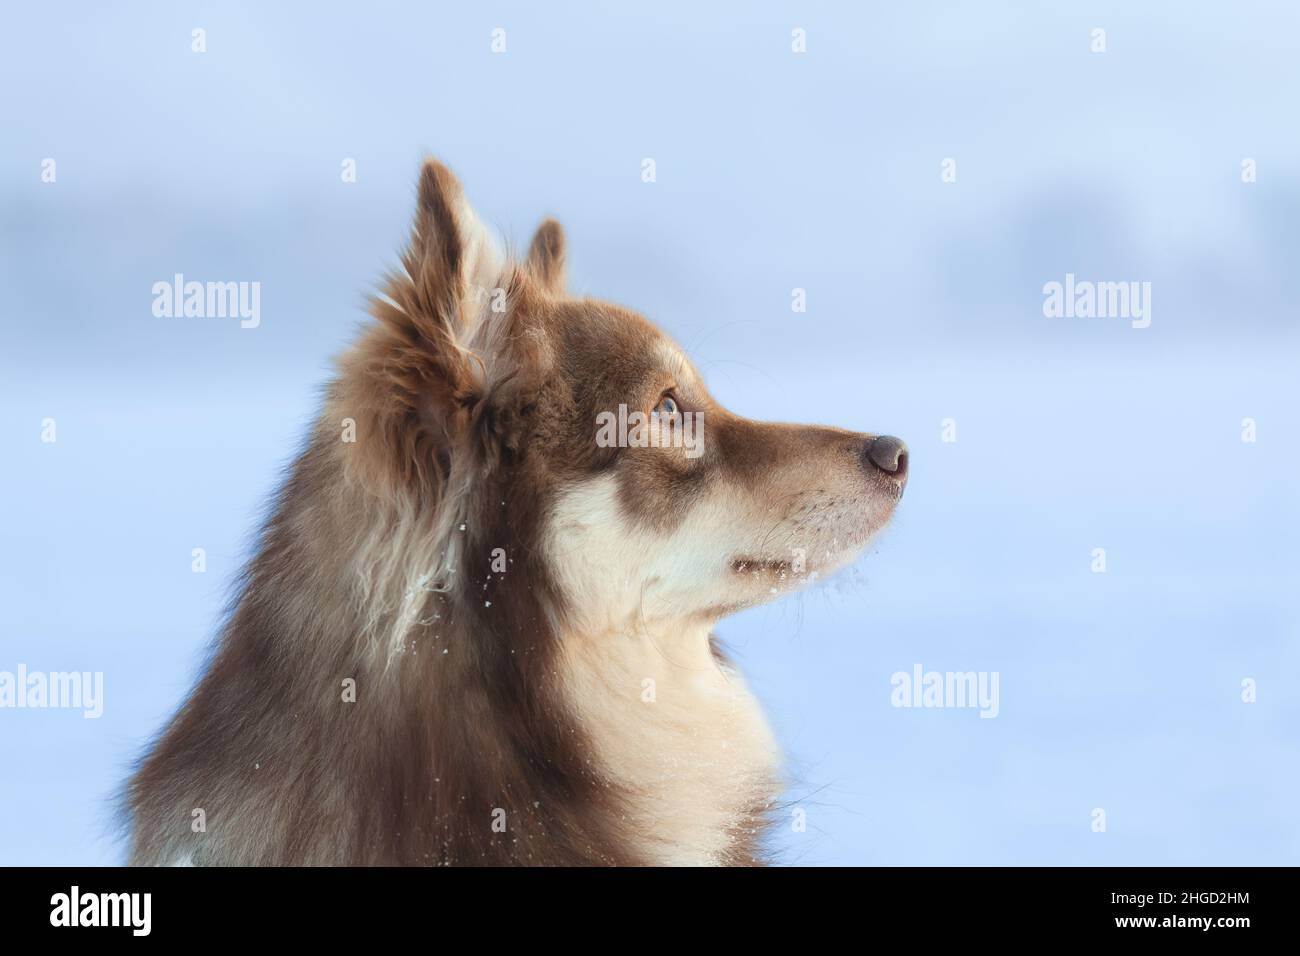 Side view of a herding dog, looking up. Foggy winter landscape in the background. Finnish lapphund. Stock Photo